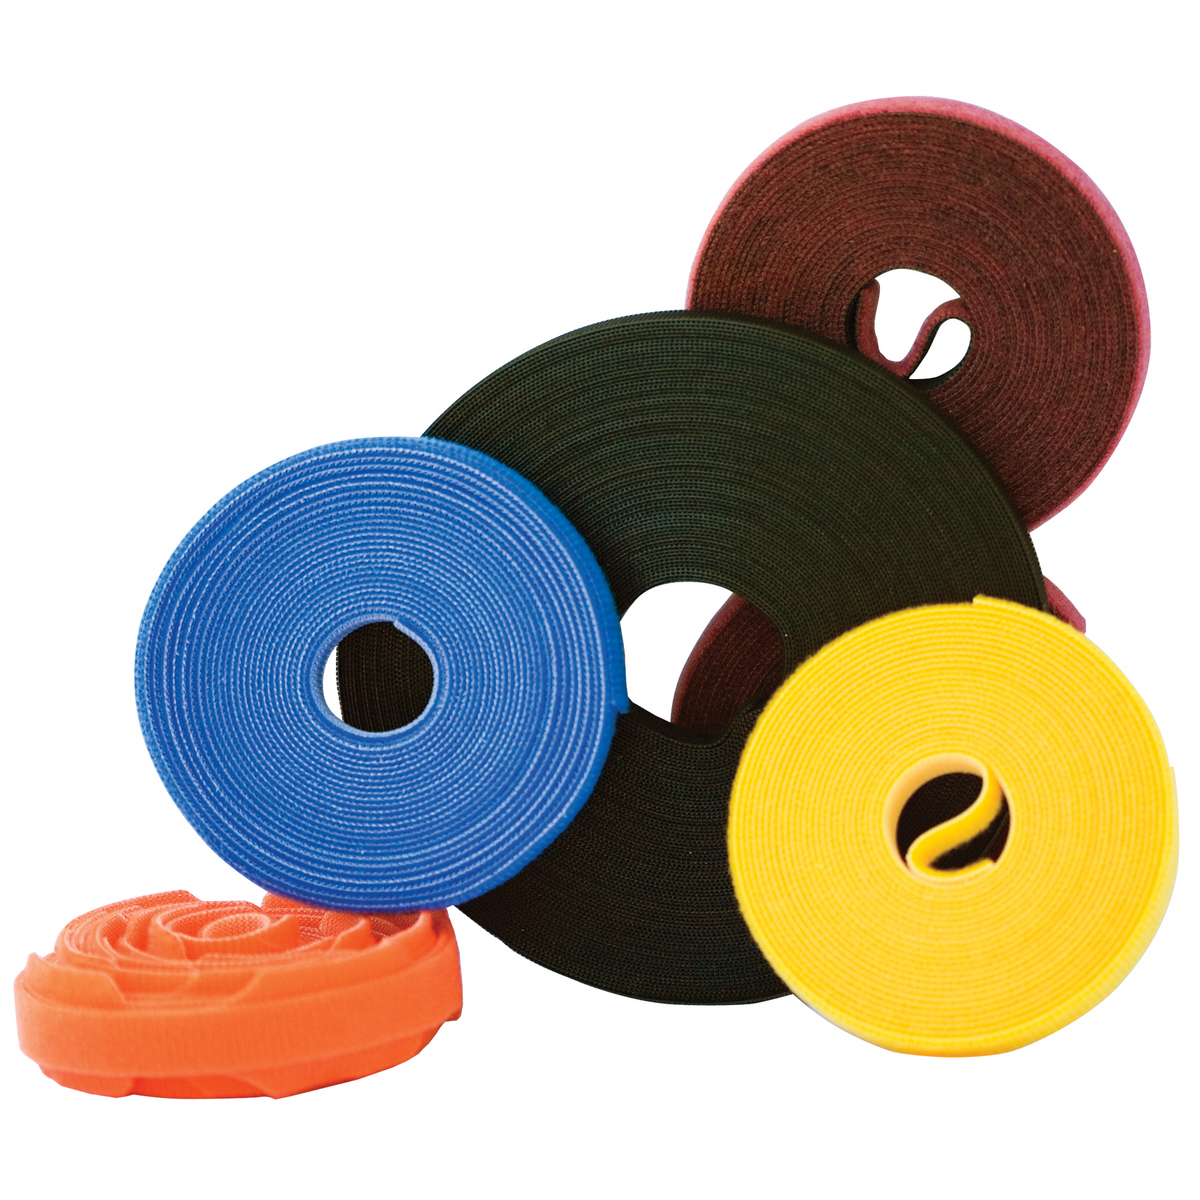 CABLEMGT, FASTENER,VELCRO,5",OR,10PK